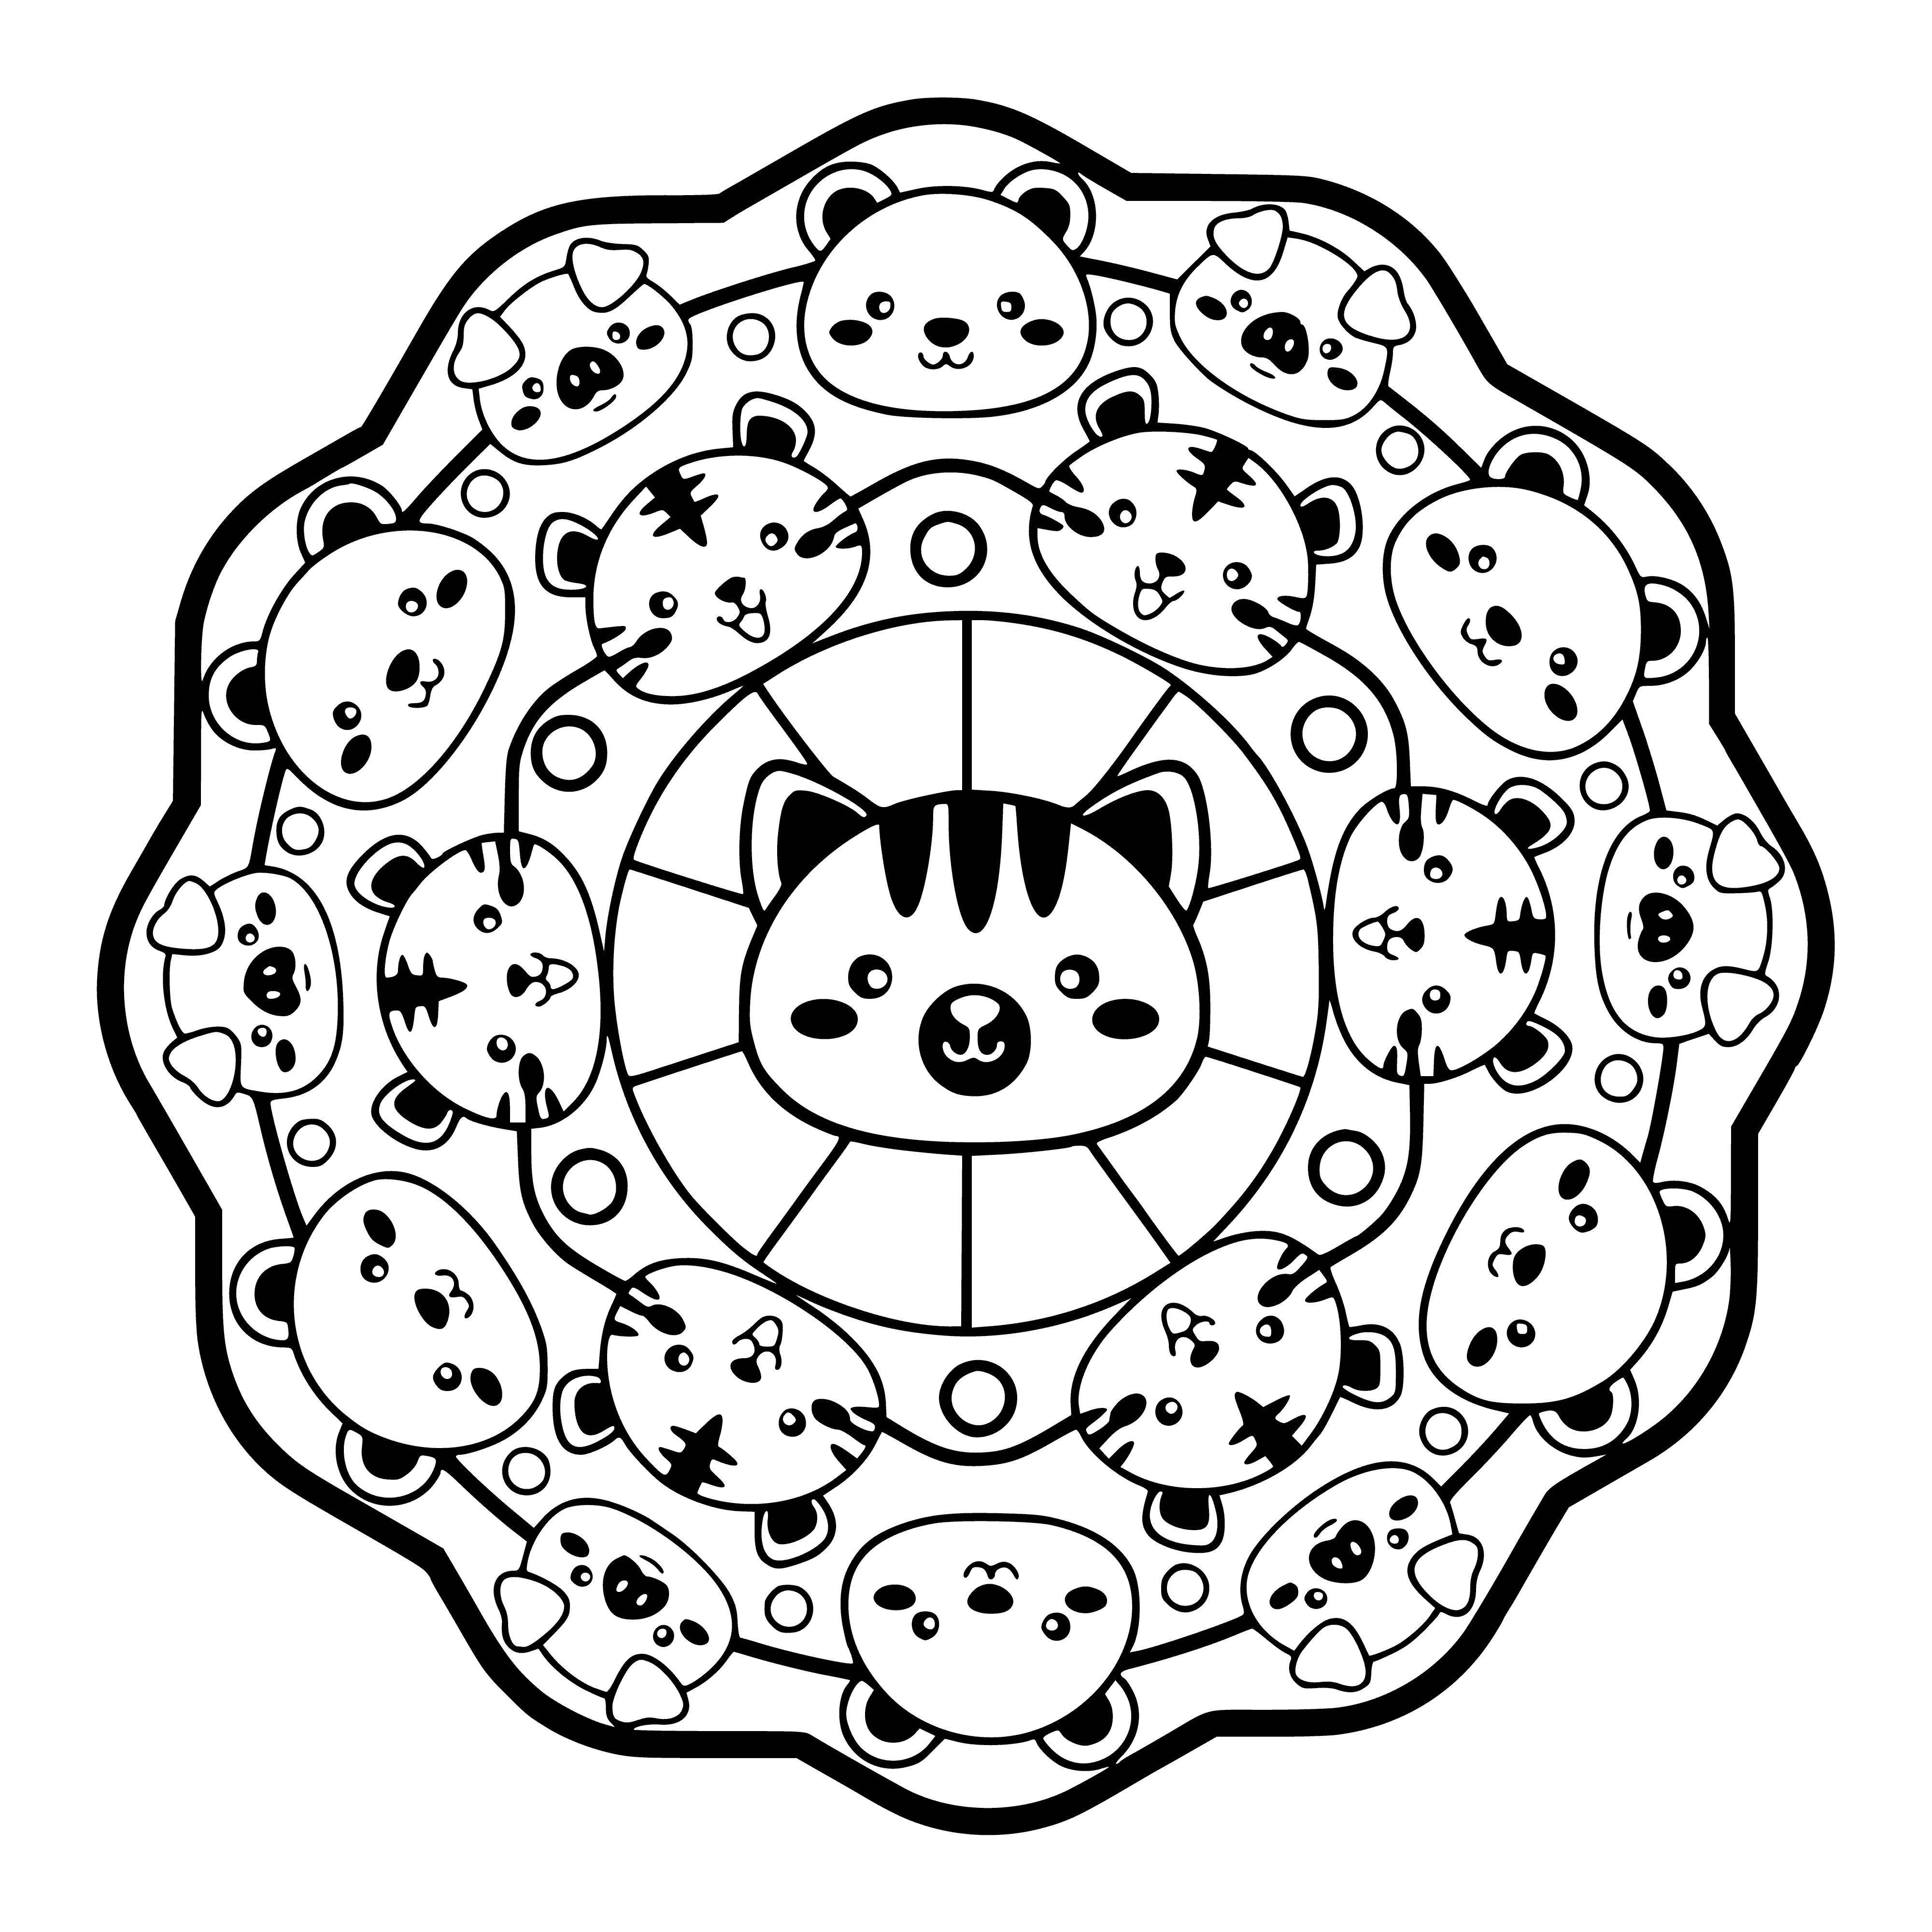 Mandala with animals coloring page